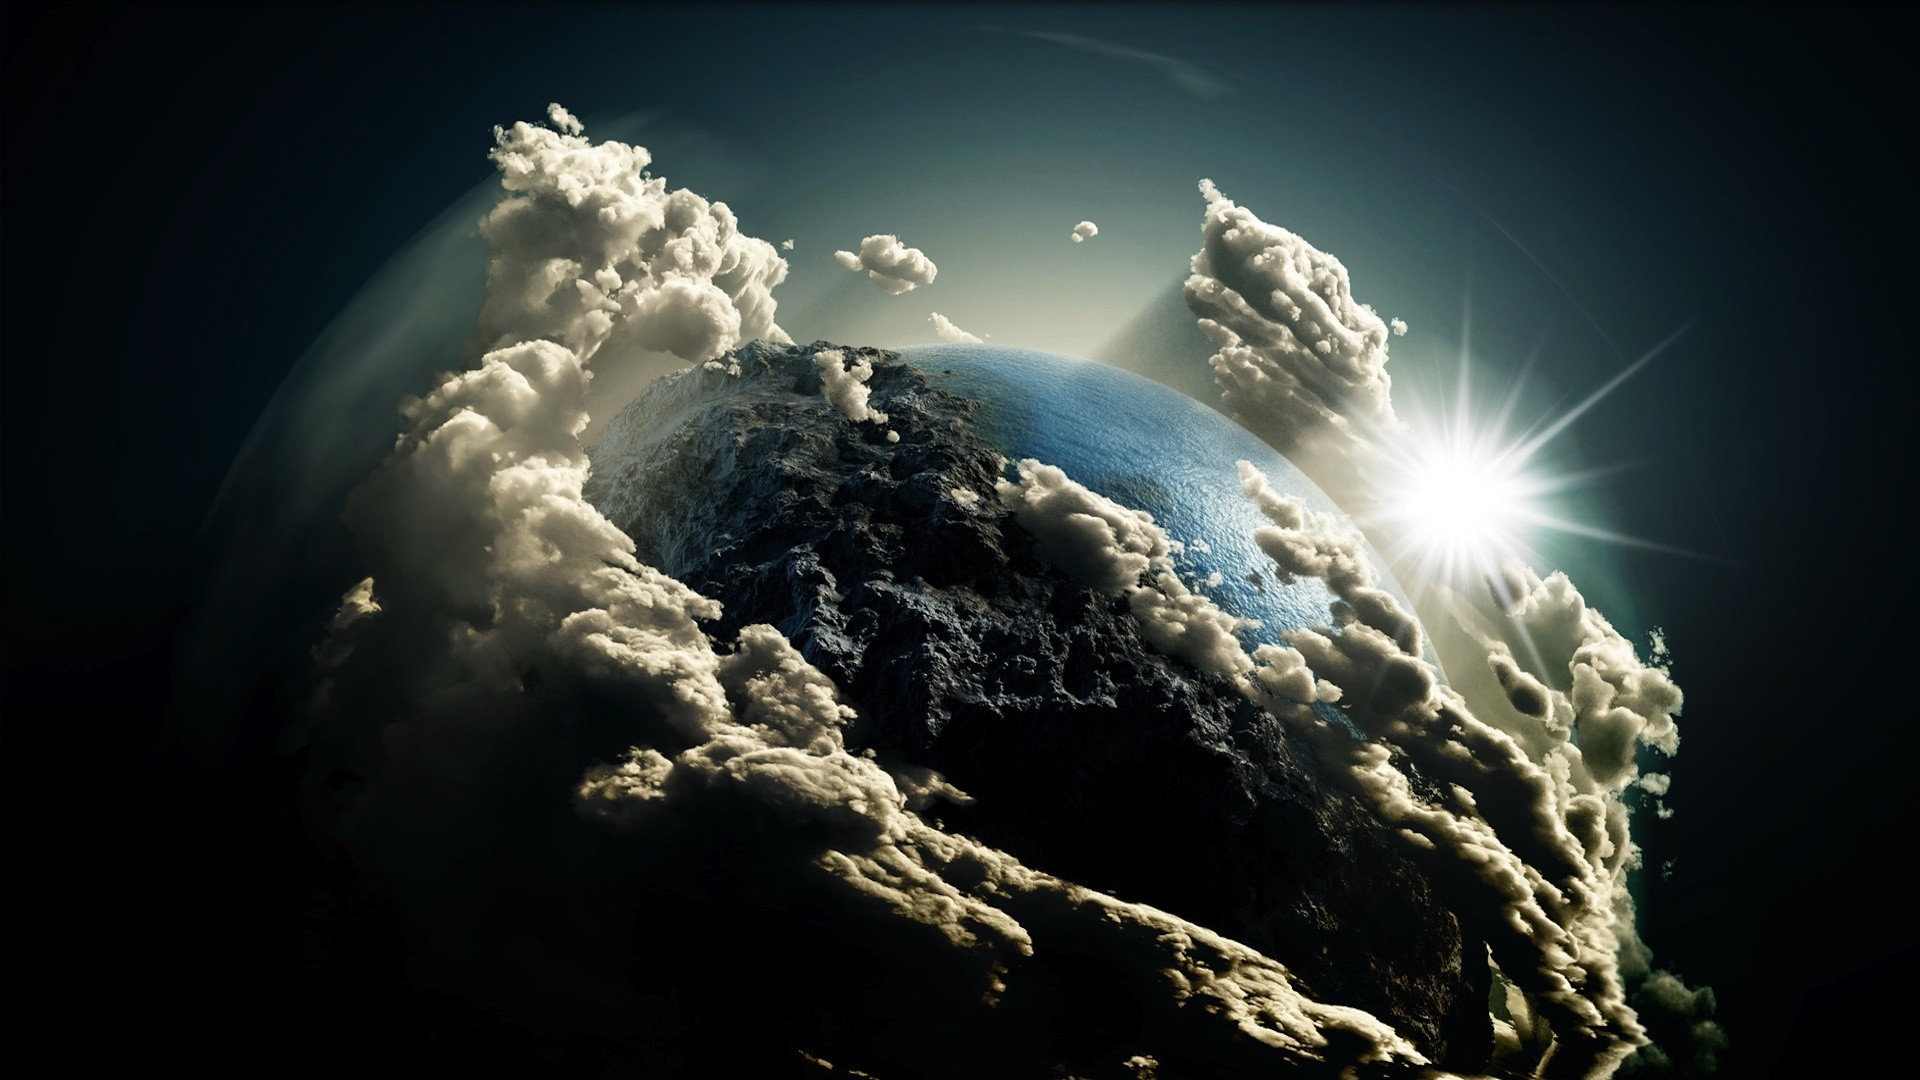 General 1920x1080 Sun artwork photo manipulation planet Earth clouds abstract digital art space art space